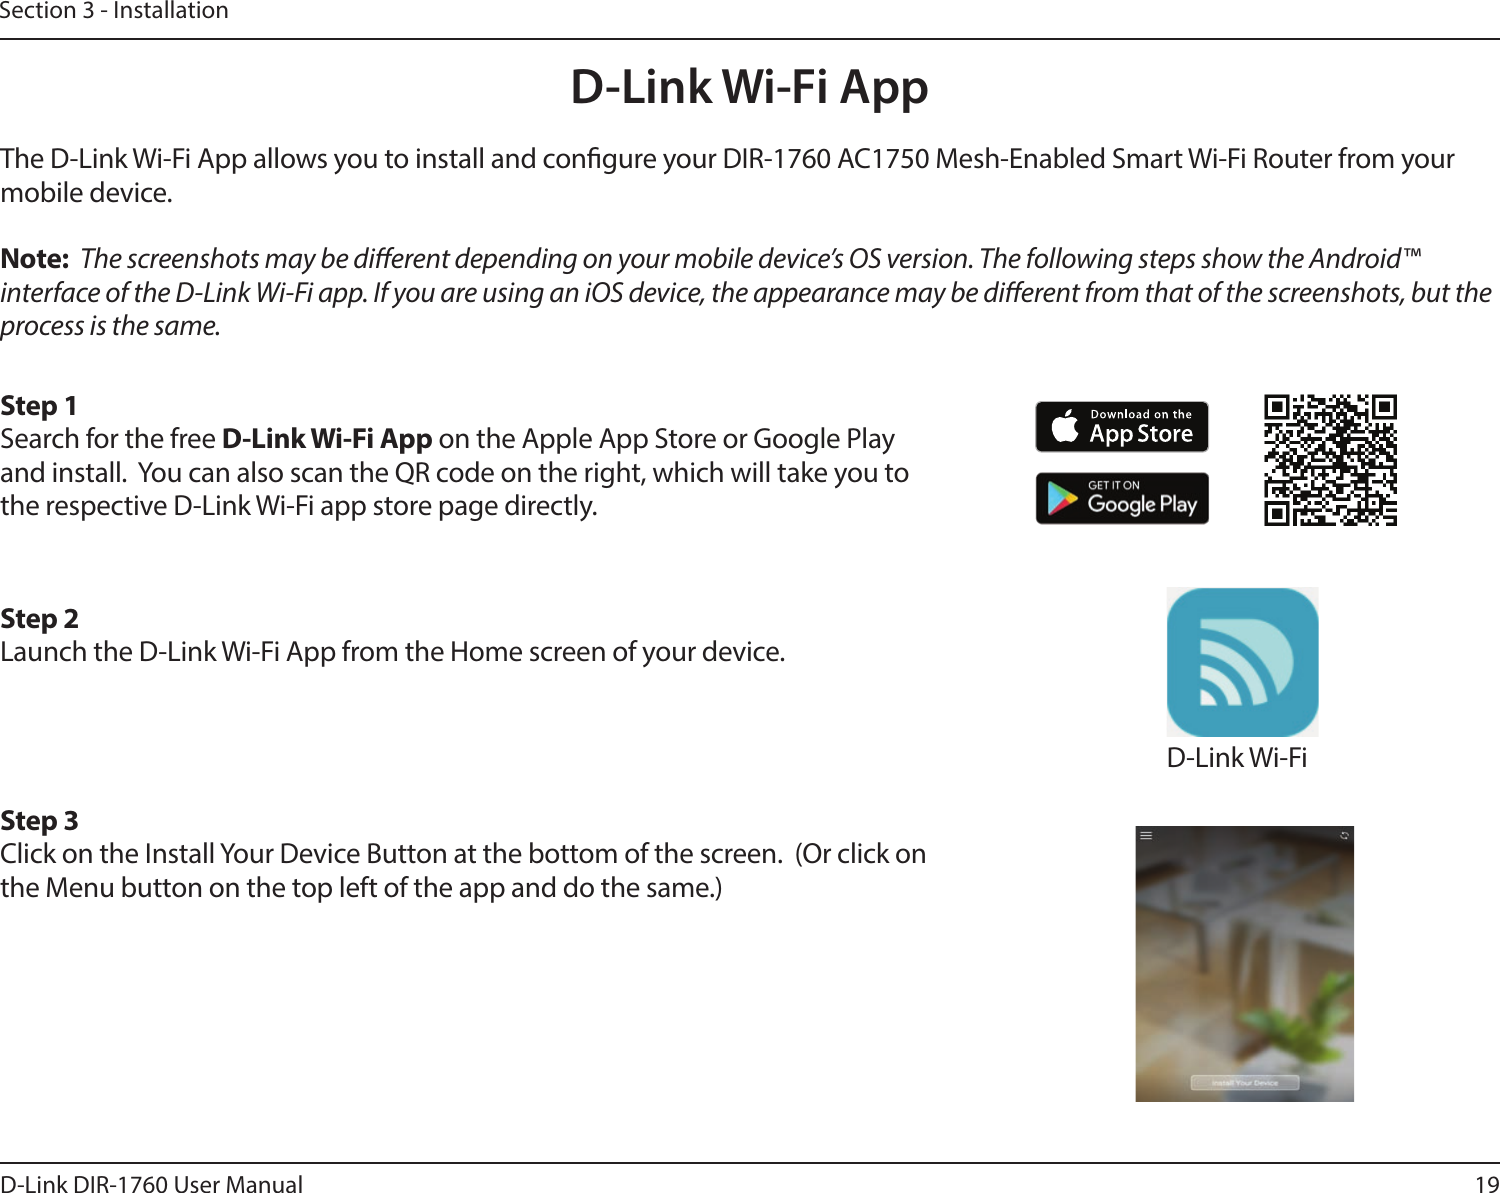 19D-Link DIR-1760 User ManualSection 3 - InstallationD-Link Wi-Fi AppThe D-Link Wi-Fi App allows you to install and congure your DIR-1760 AC1750 Mesh-Enabled Smart Wi-Fi Router from your mobile device.Note:  The screenshots may be dierent depending on your mobile device’s OS version. The following steps show the Android™ interface of the D-Link Wi-Fi app. If you are using an iOS device, the appearance may be dierent from that of the screenshots, but the process is the same.Step 1Search for the free D-Link Wi-Fi App on the Apple App Store or Google Play and install.  You can also scan the QR code on the right, which will take you to the respective D-Link Wi-Fi app store page directly.Step 2Launch the D-Link Wi-Fi App from the Home screen of your device.Step 3Click on the Install Your Device Button at the bottom of the screen.  (Or click on the Menu button on the top left of the app and do the same.)D-Link Wi-Fi